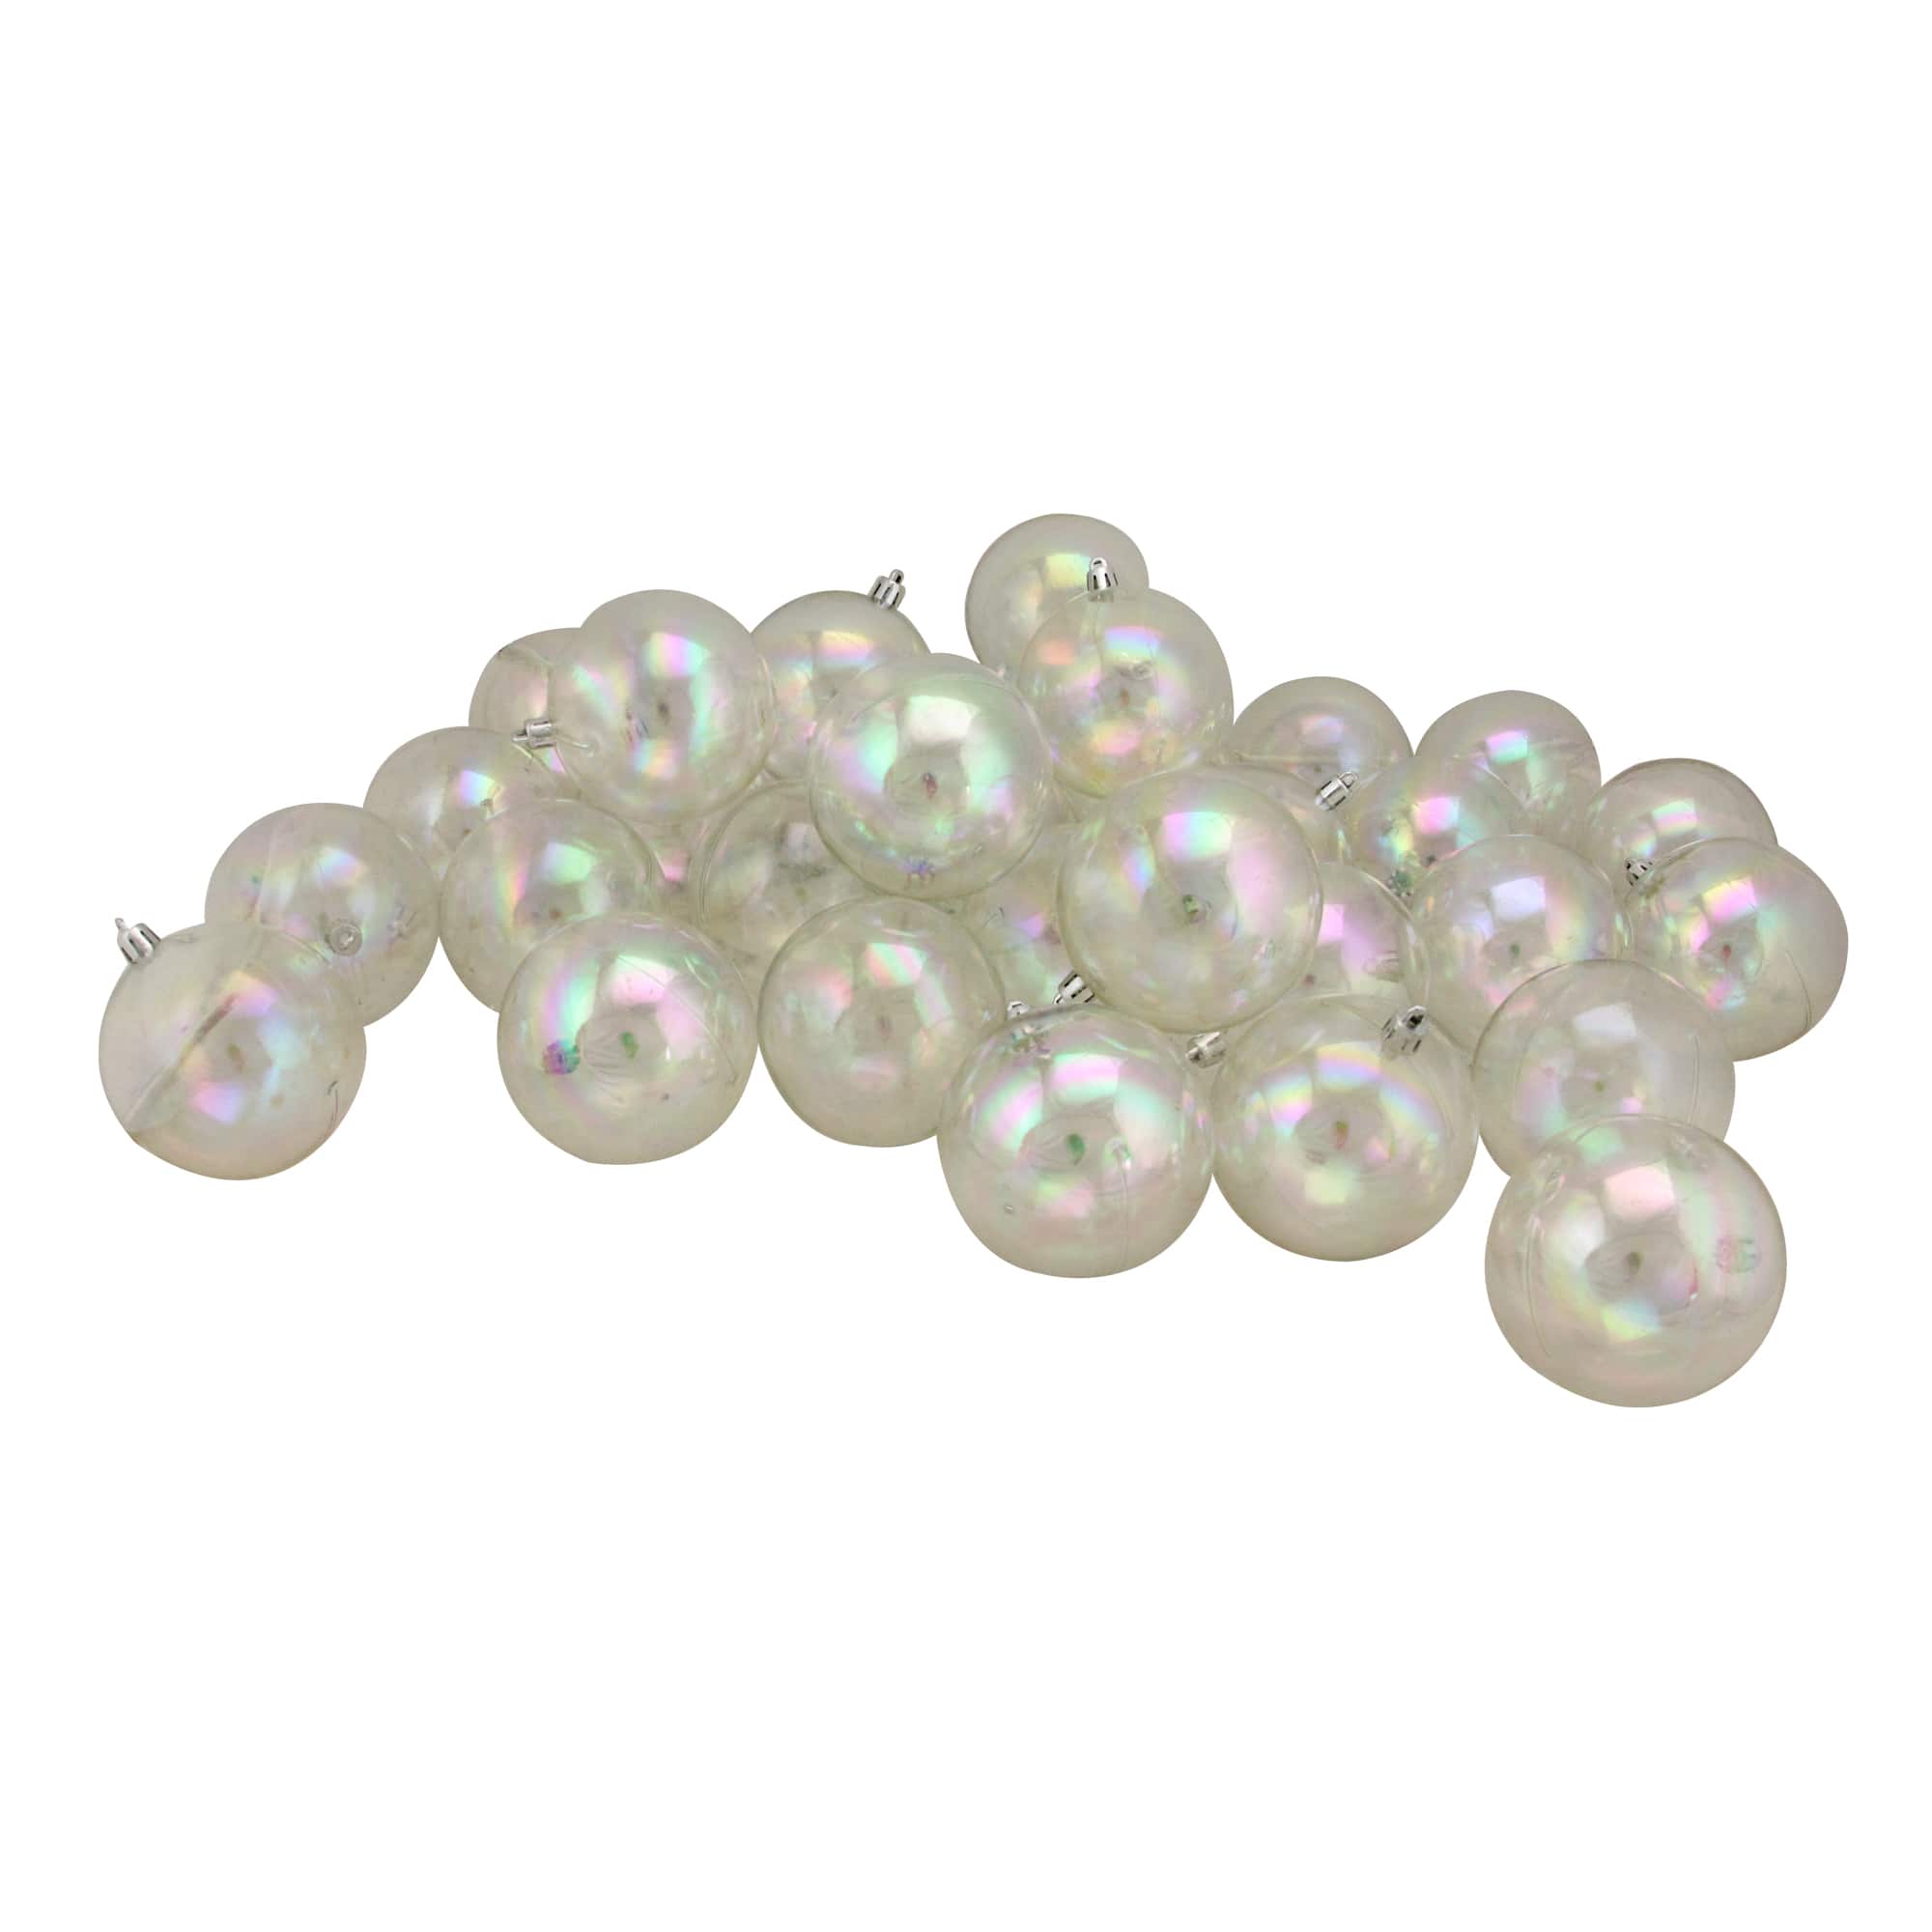 Clear Iridescent Glass Christmas Ornaments